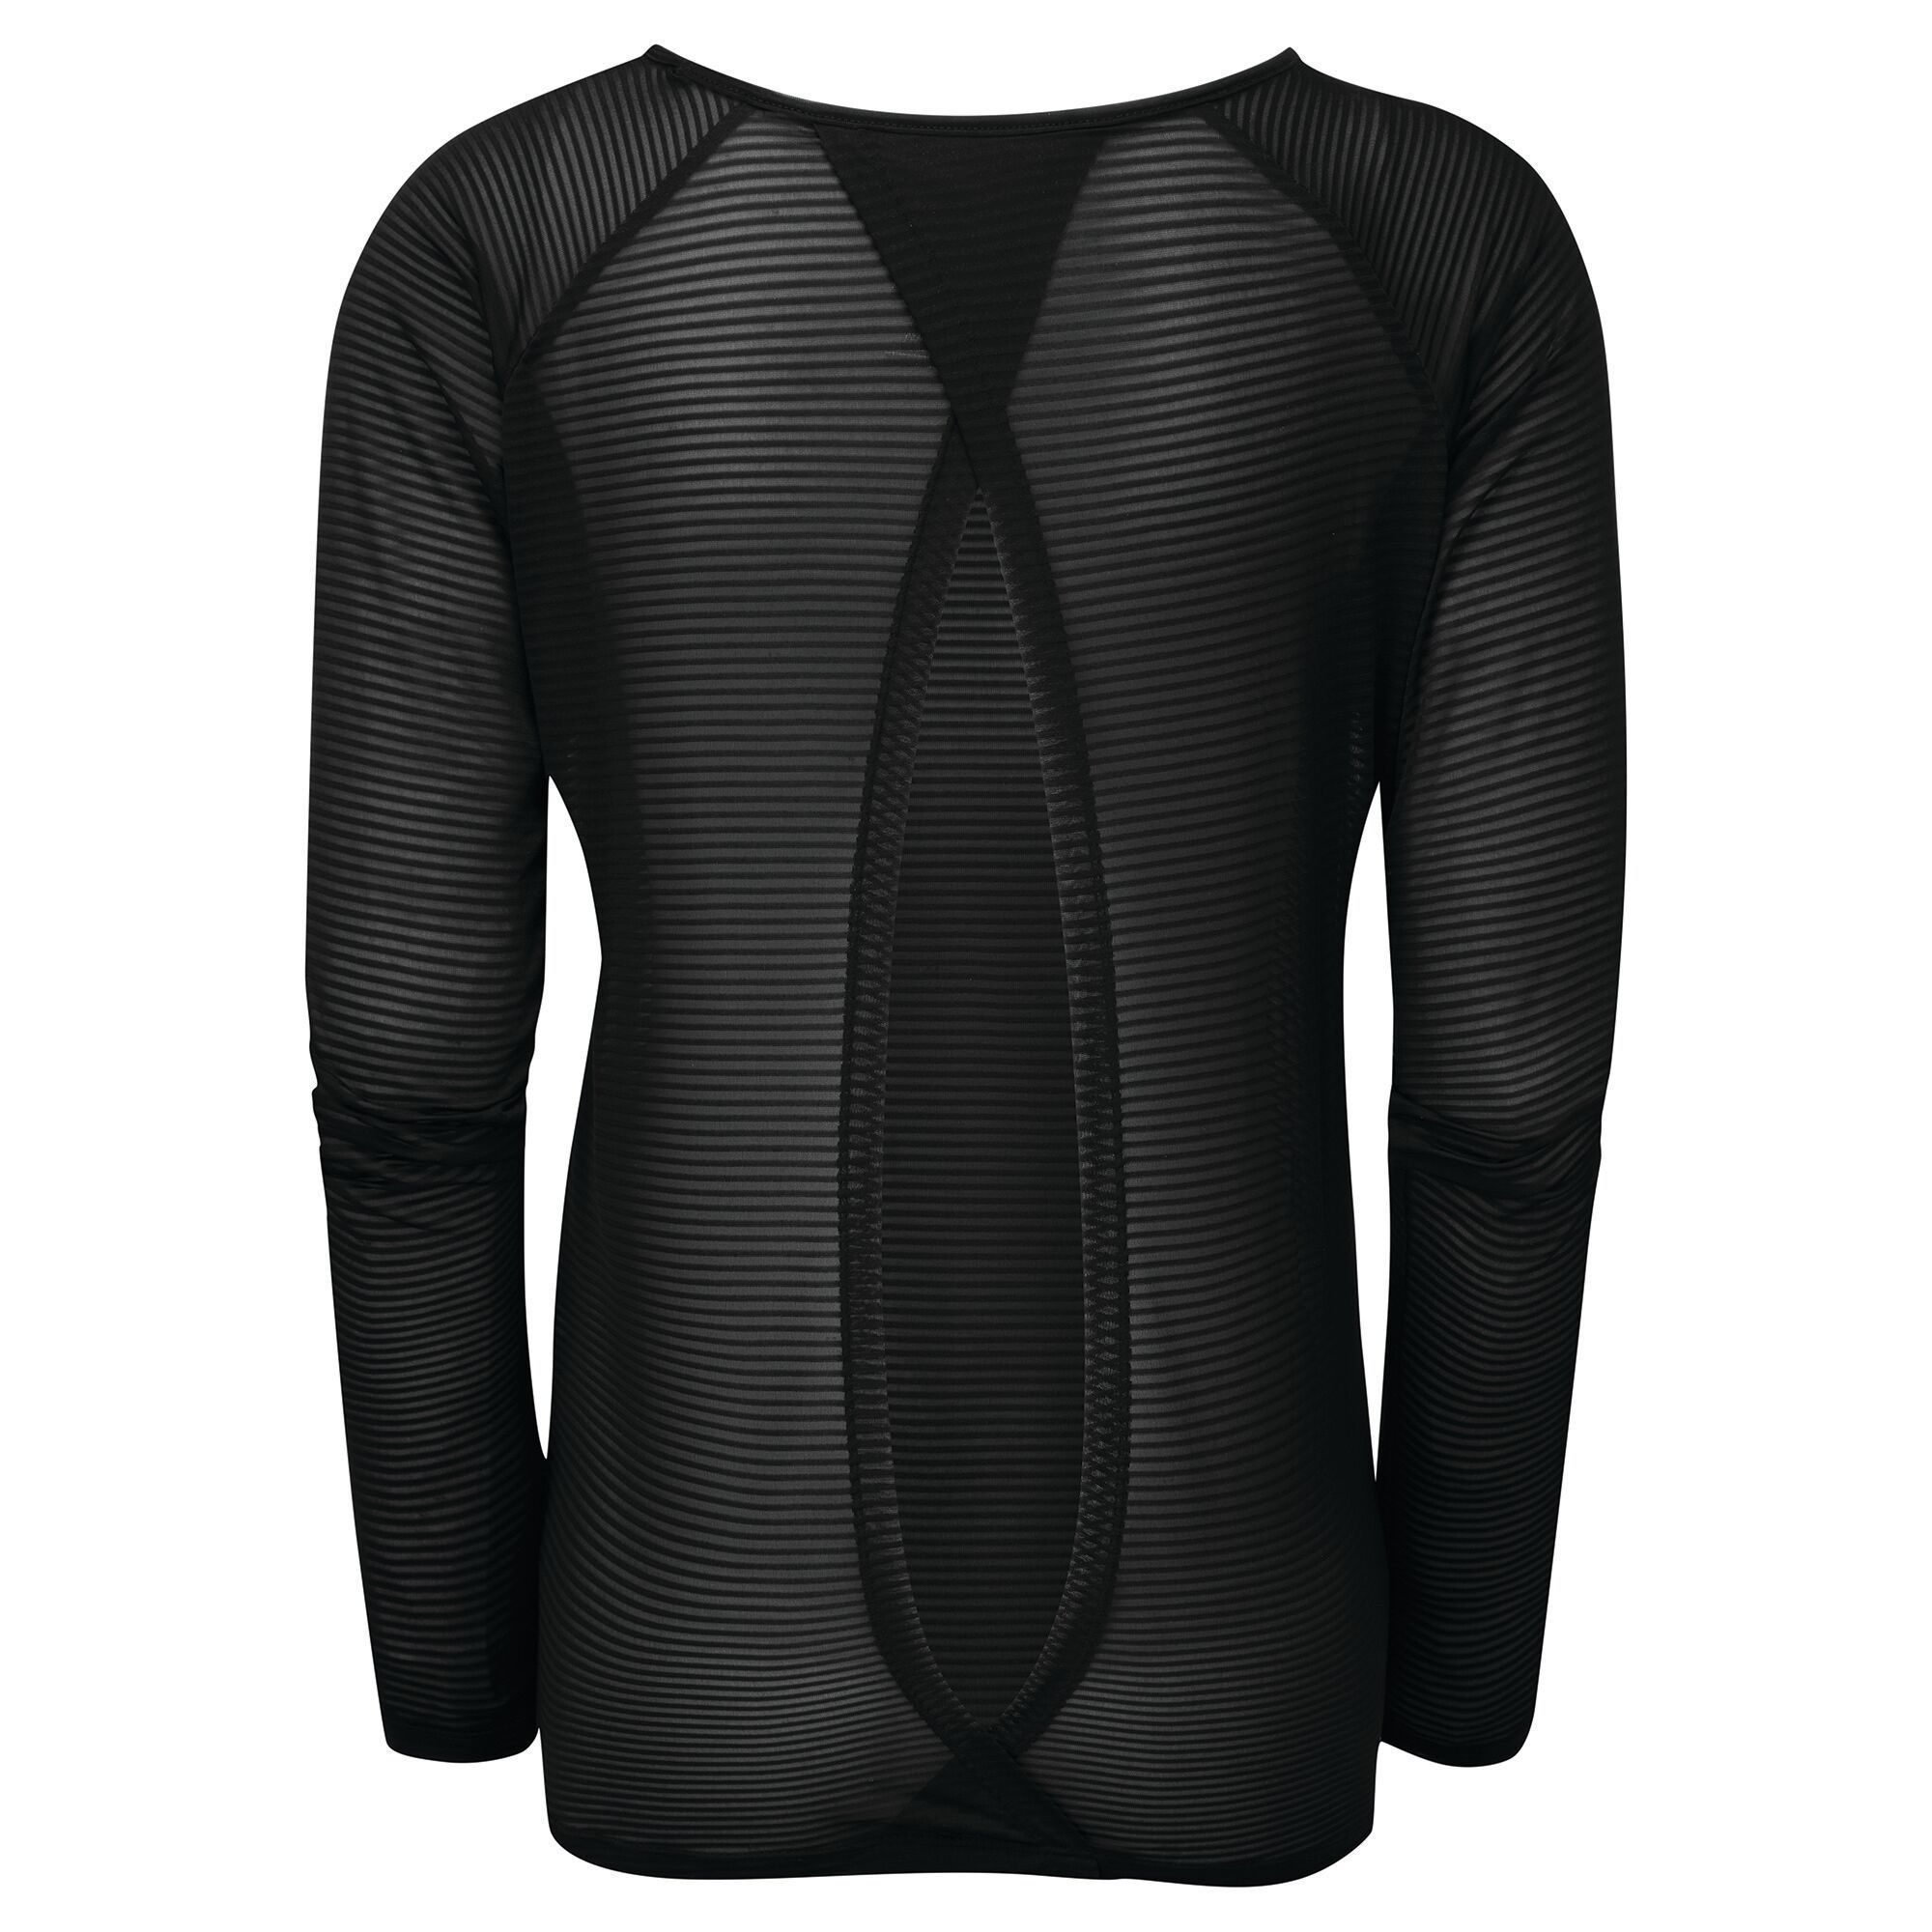 Material: 100% Polyester (Q-Wic Plus lightweight polyester fabric.) Long sleeved workout top with crossover cutout back design and scooped round neck. Features anti-bacterial odour control treatment and motion-friendly sleeve design.